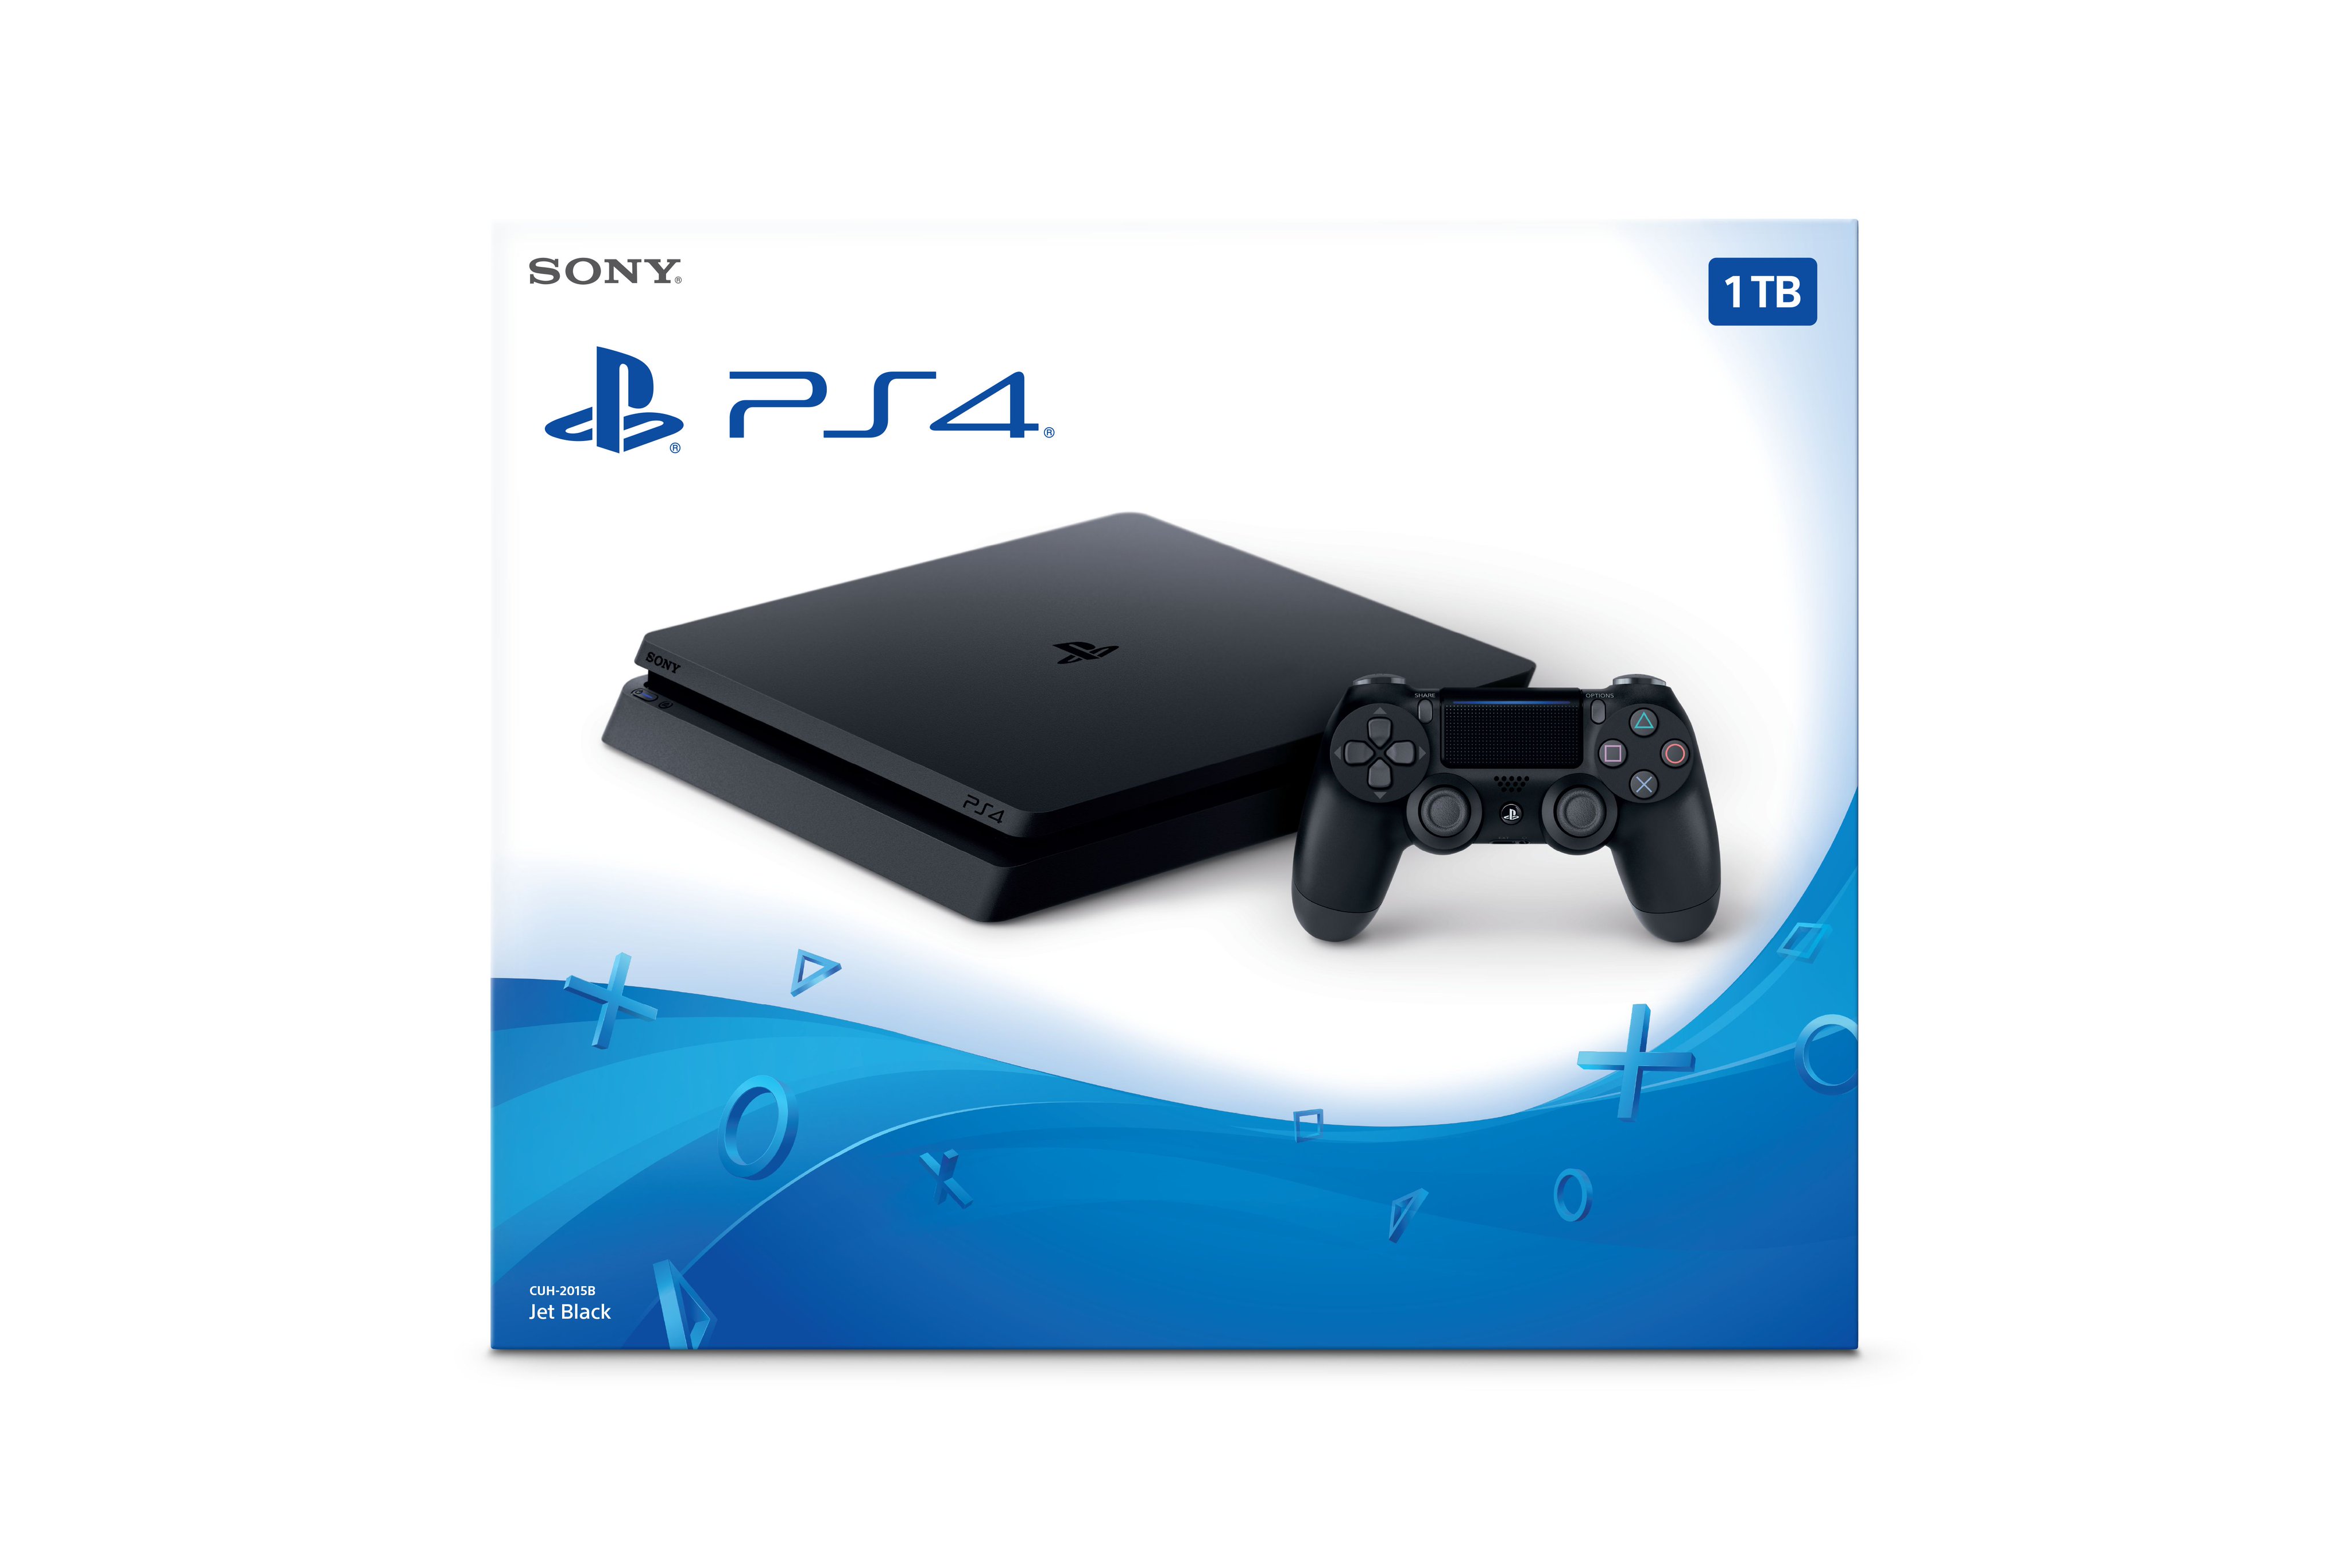 excentrisk Påhængsmotor mammal GameStop Canada 🎮 on Twitter: "#PS4 Slim 1TB Console is now available for  pre-order! Hits stores May 1. Reserve yours online here:  https://t.co/ovIrrlJirp https://t.co/qGwe6nmGag" / Twitter